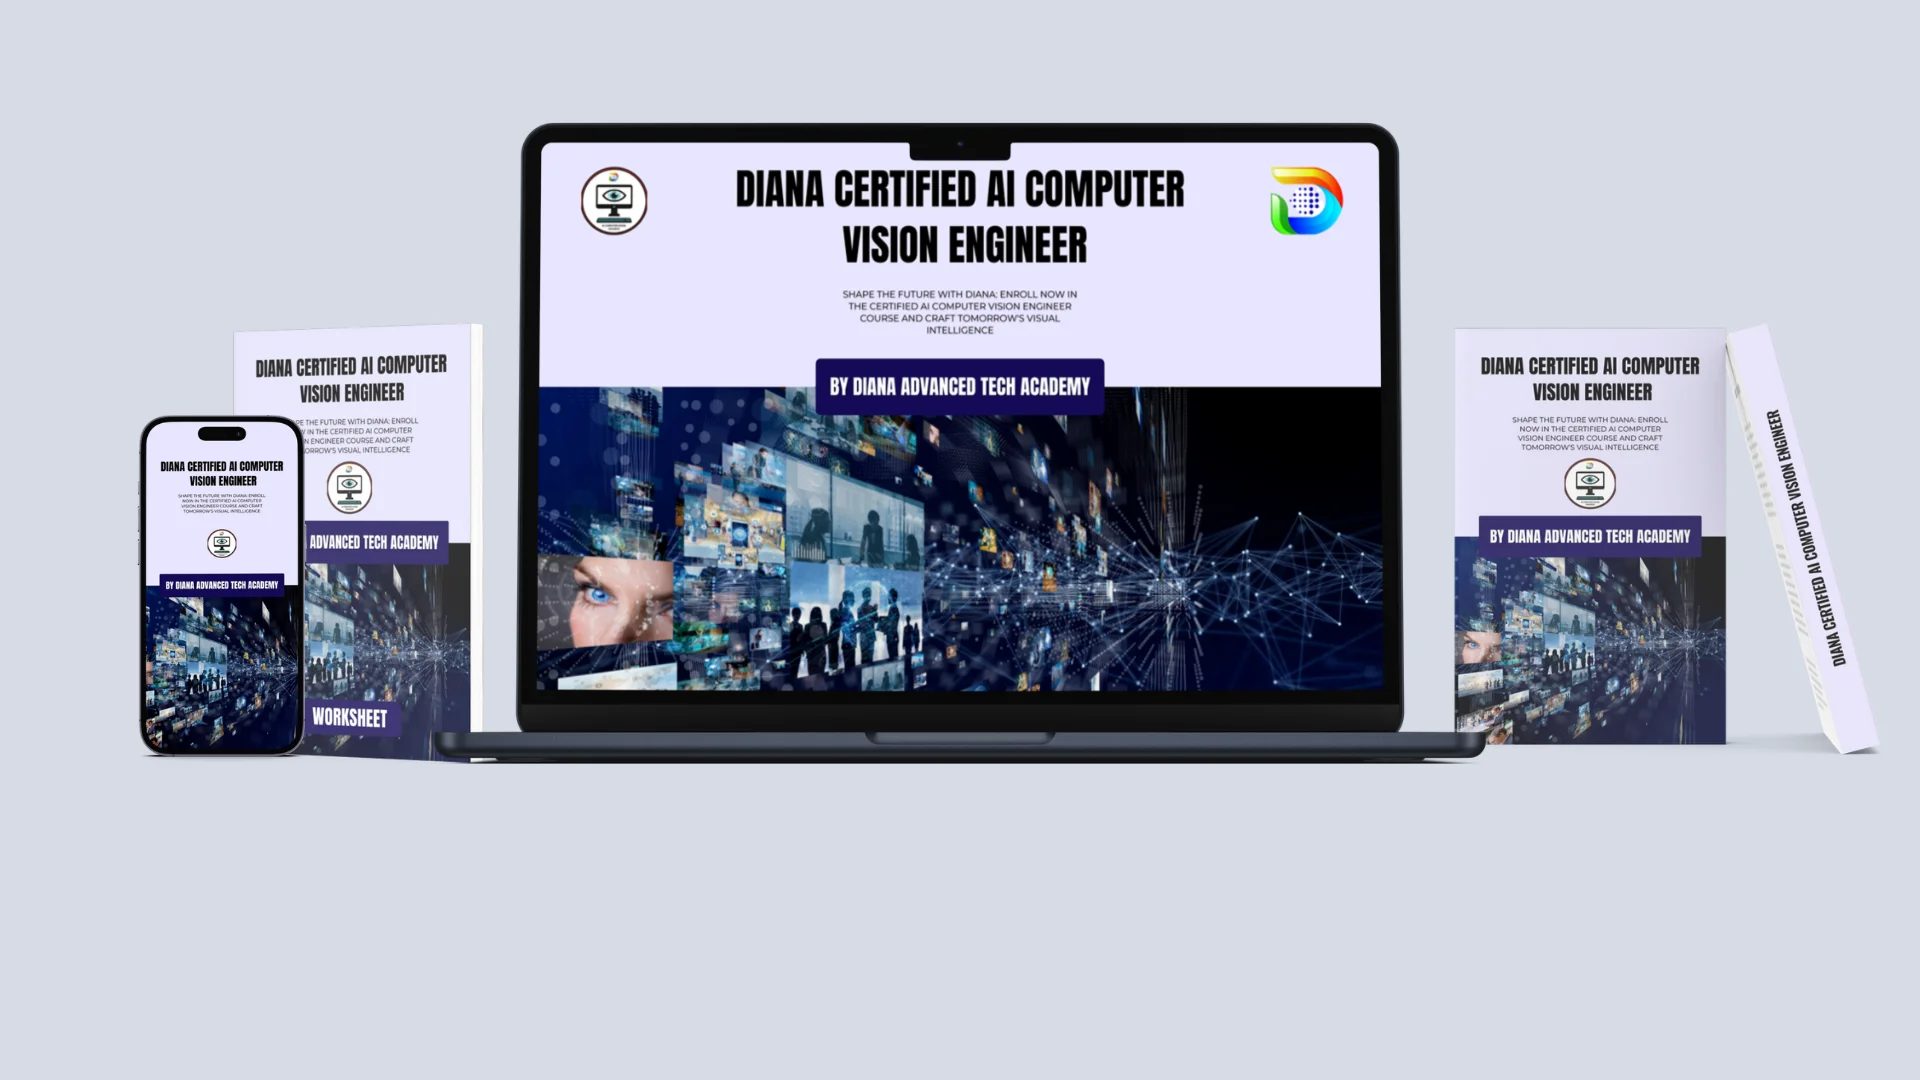 Diana Certified AI Computer Vision Engineer